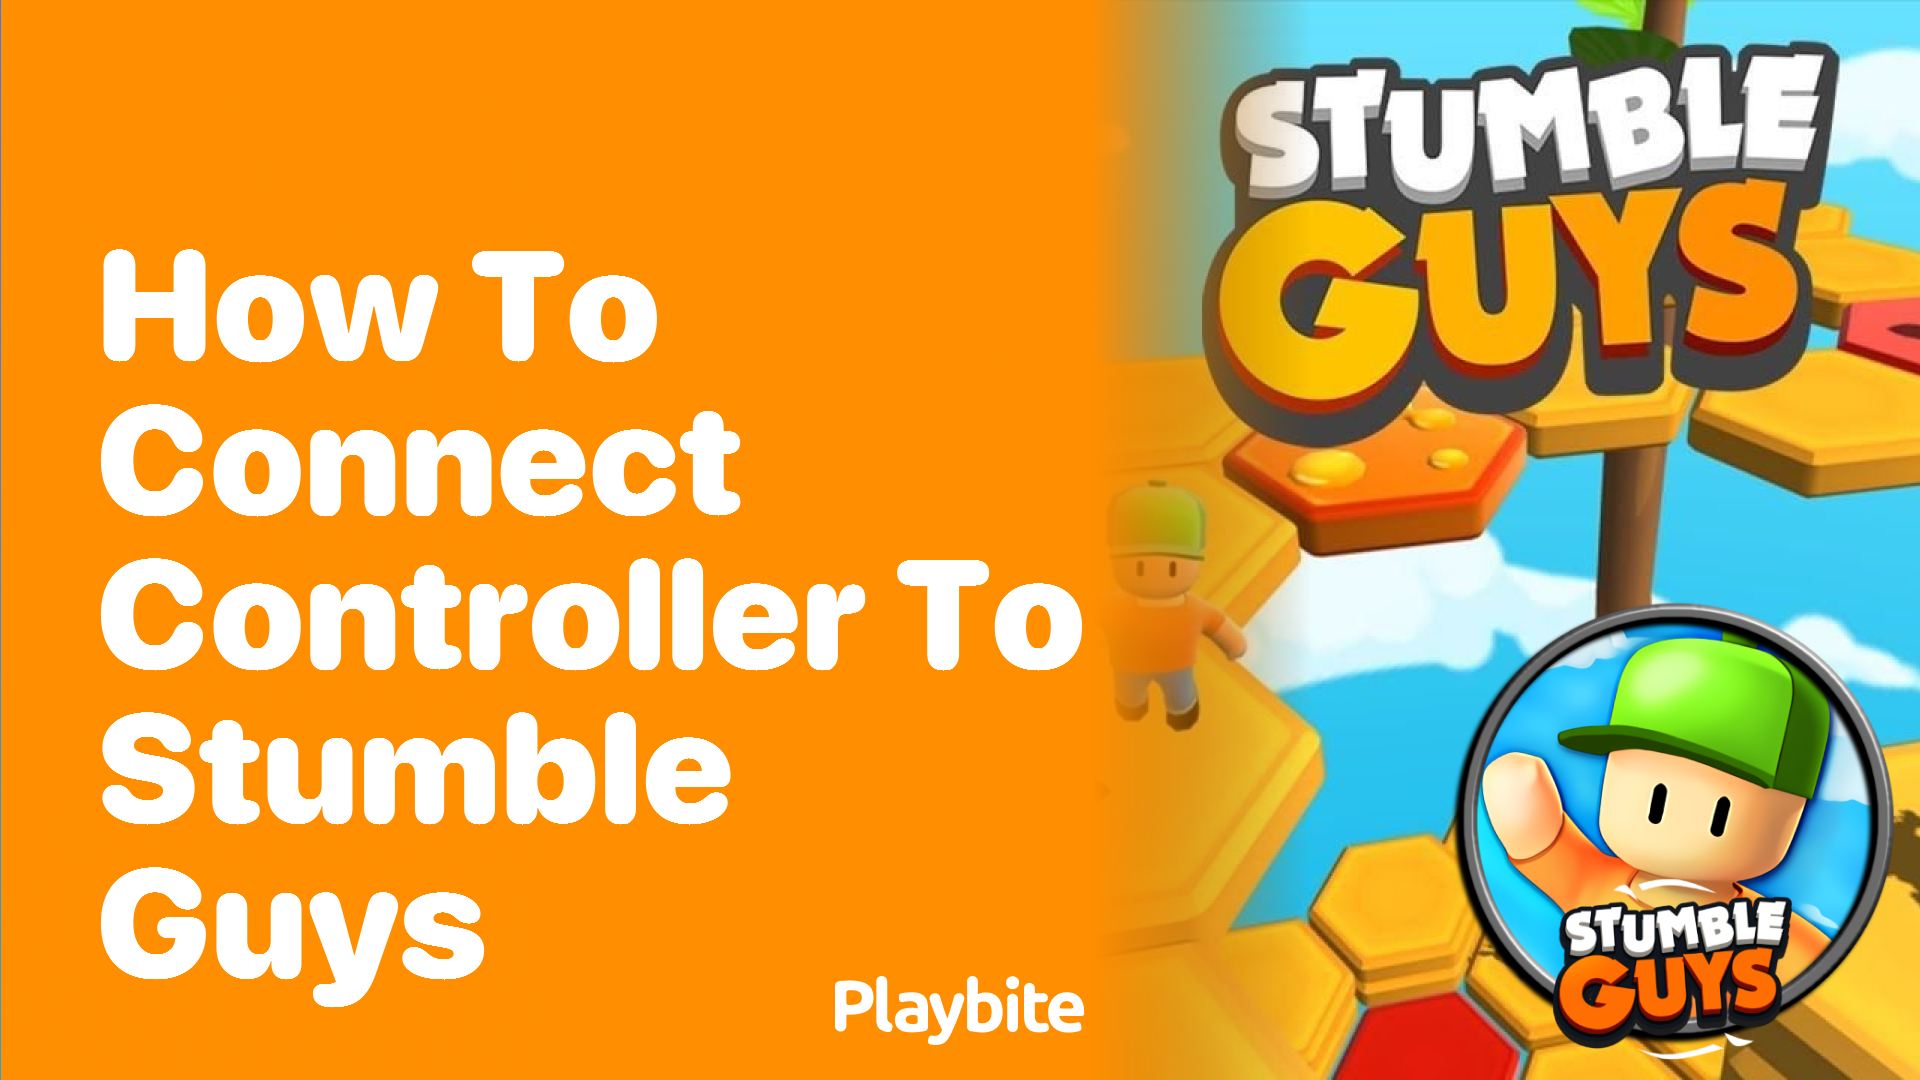 How to Connect Controller to Stumble Guys: A Fun Guide